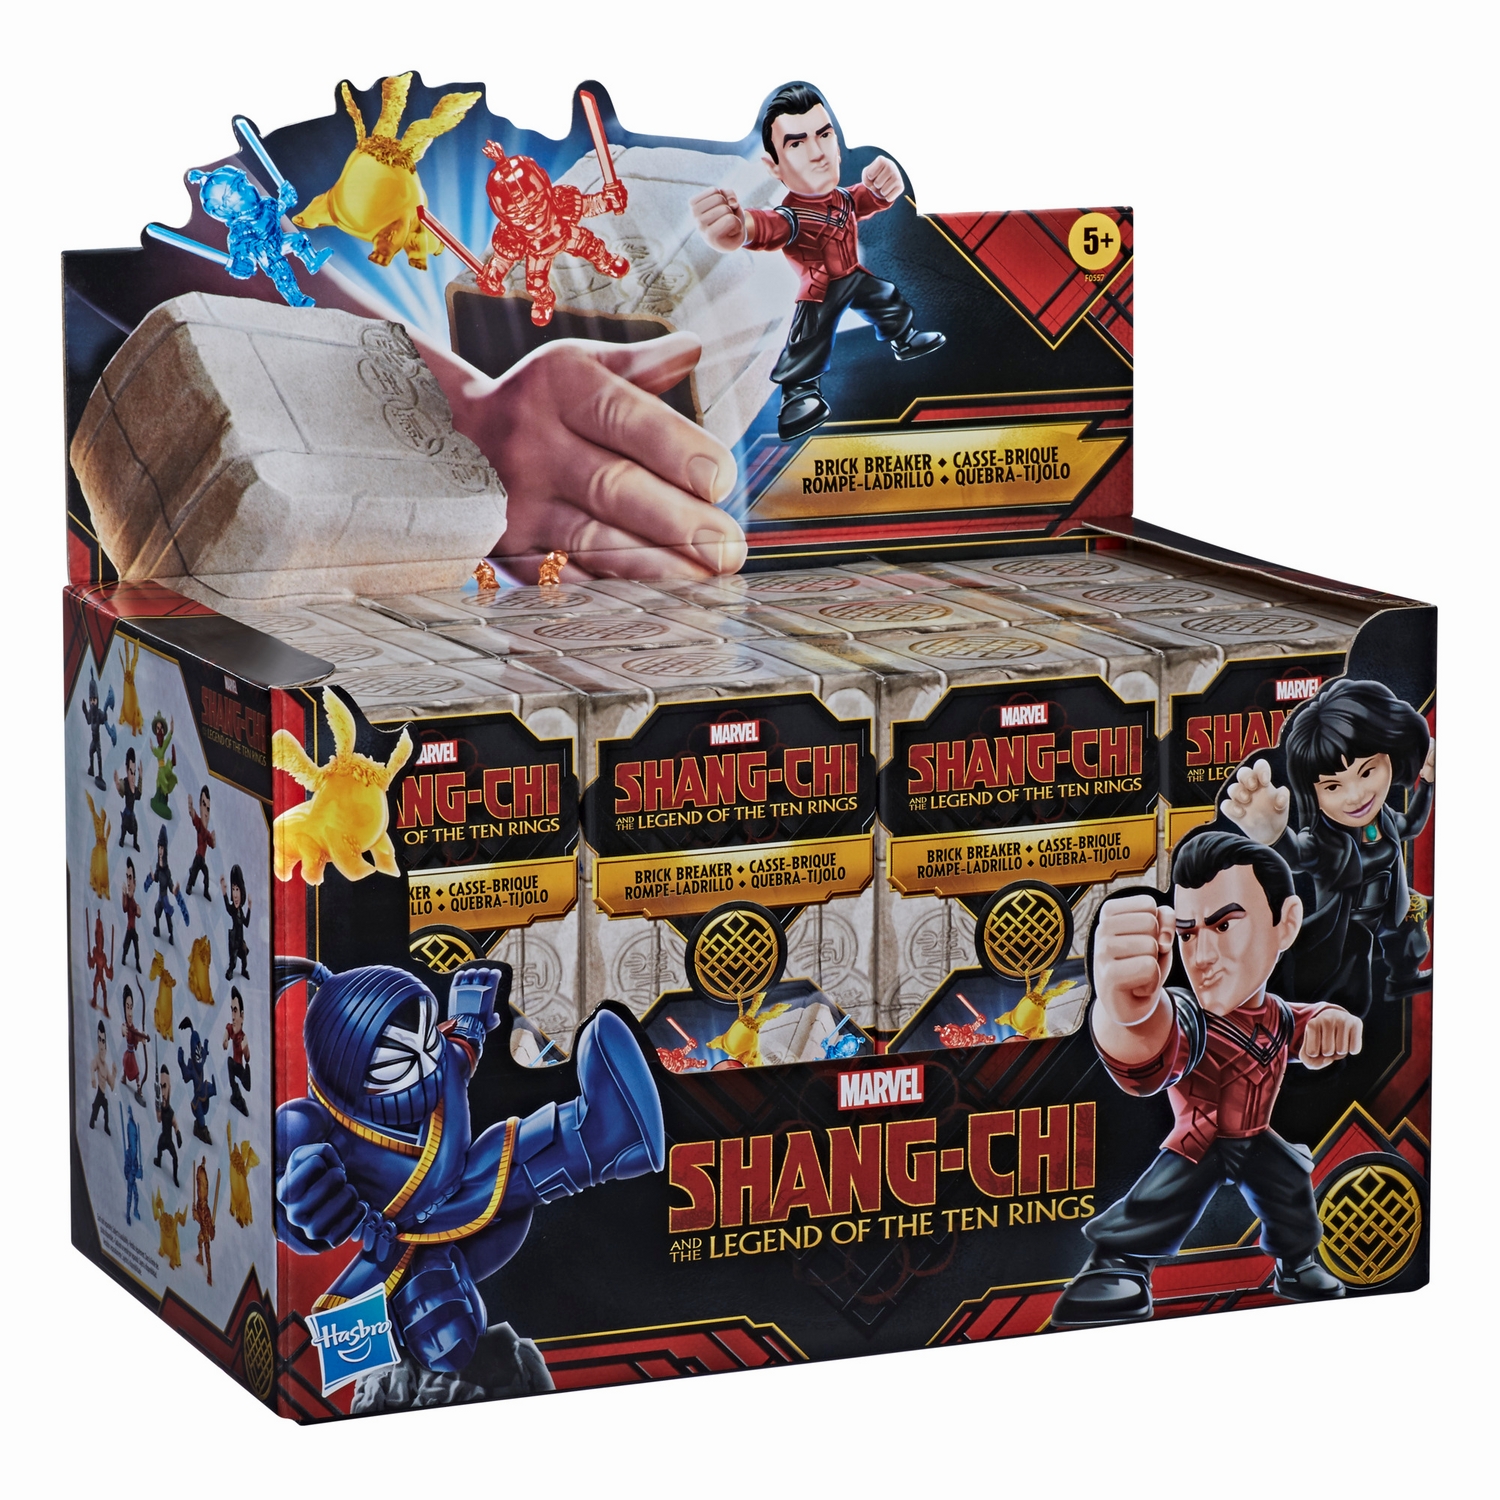 MARVEL SHANG-CHI AND THE LEGEND OF THE TEN RINGS 2-INCH BRICK BREAKERS MINI-FIGURES - pckging (5).jpg